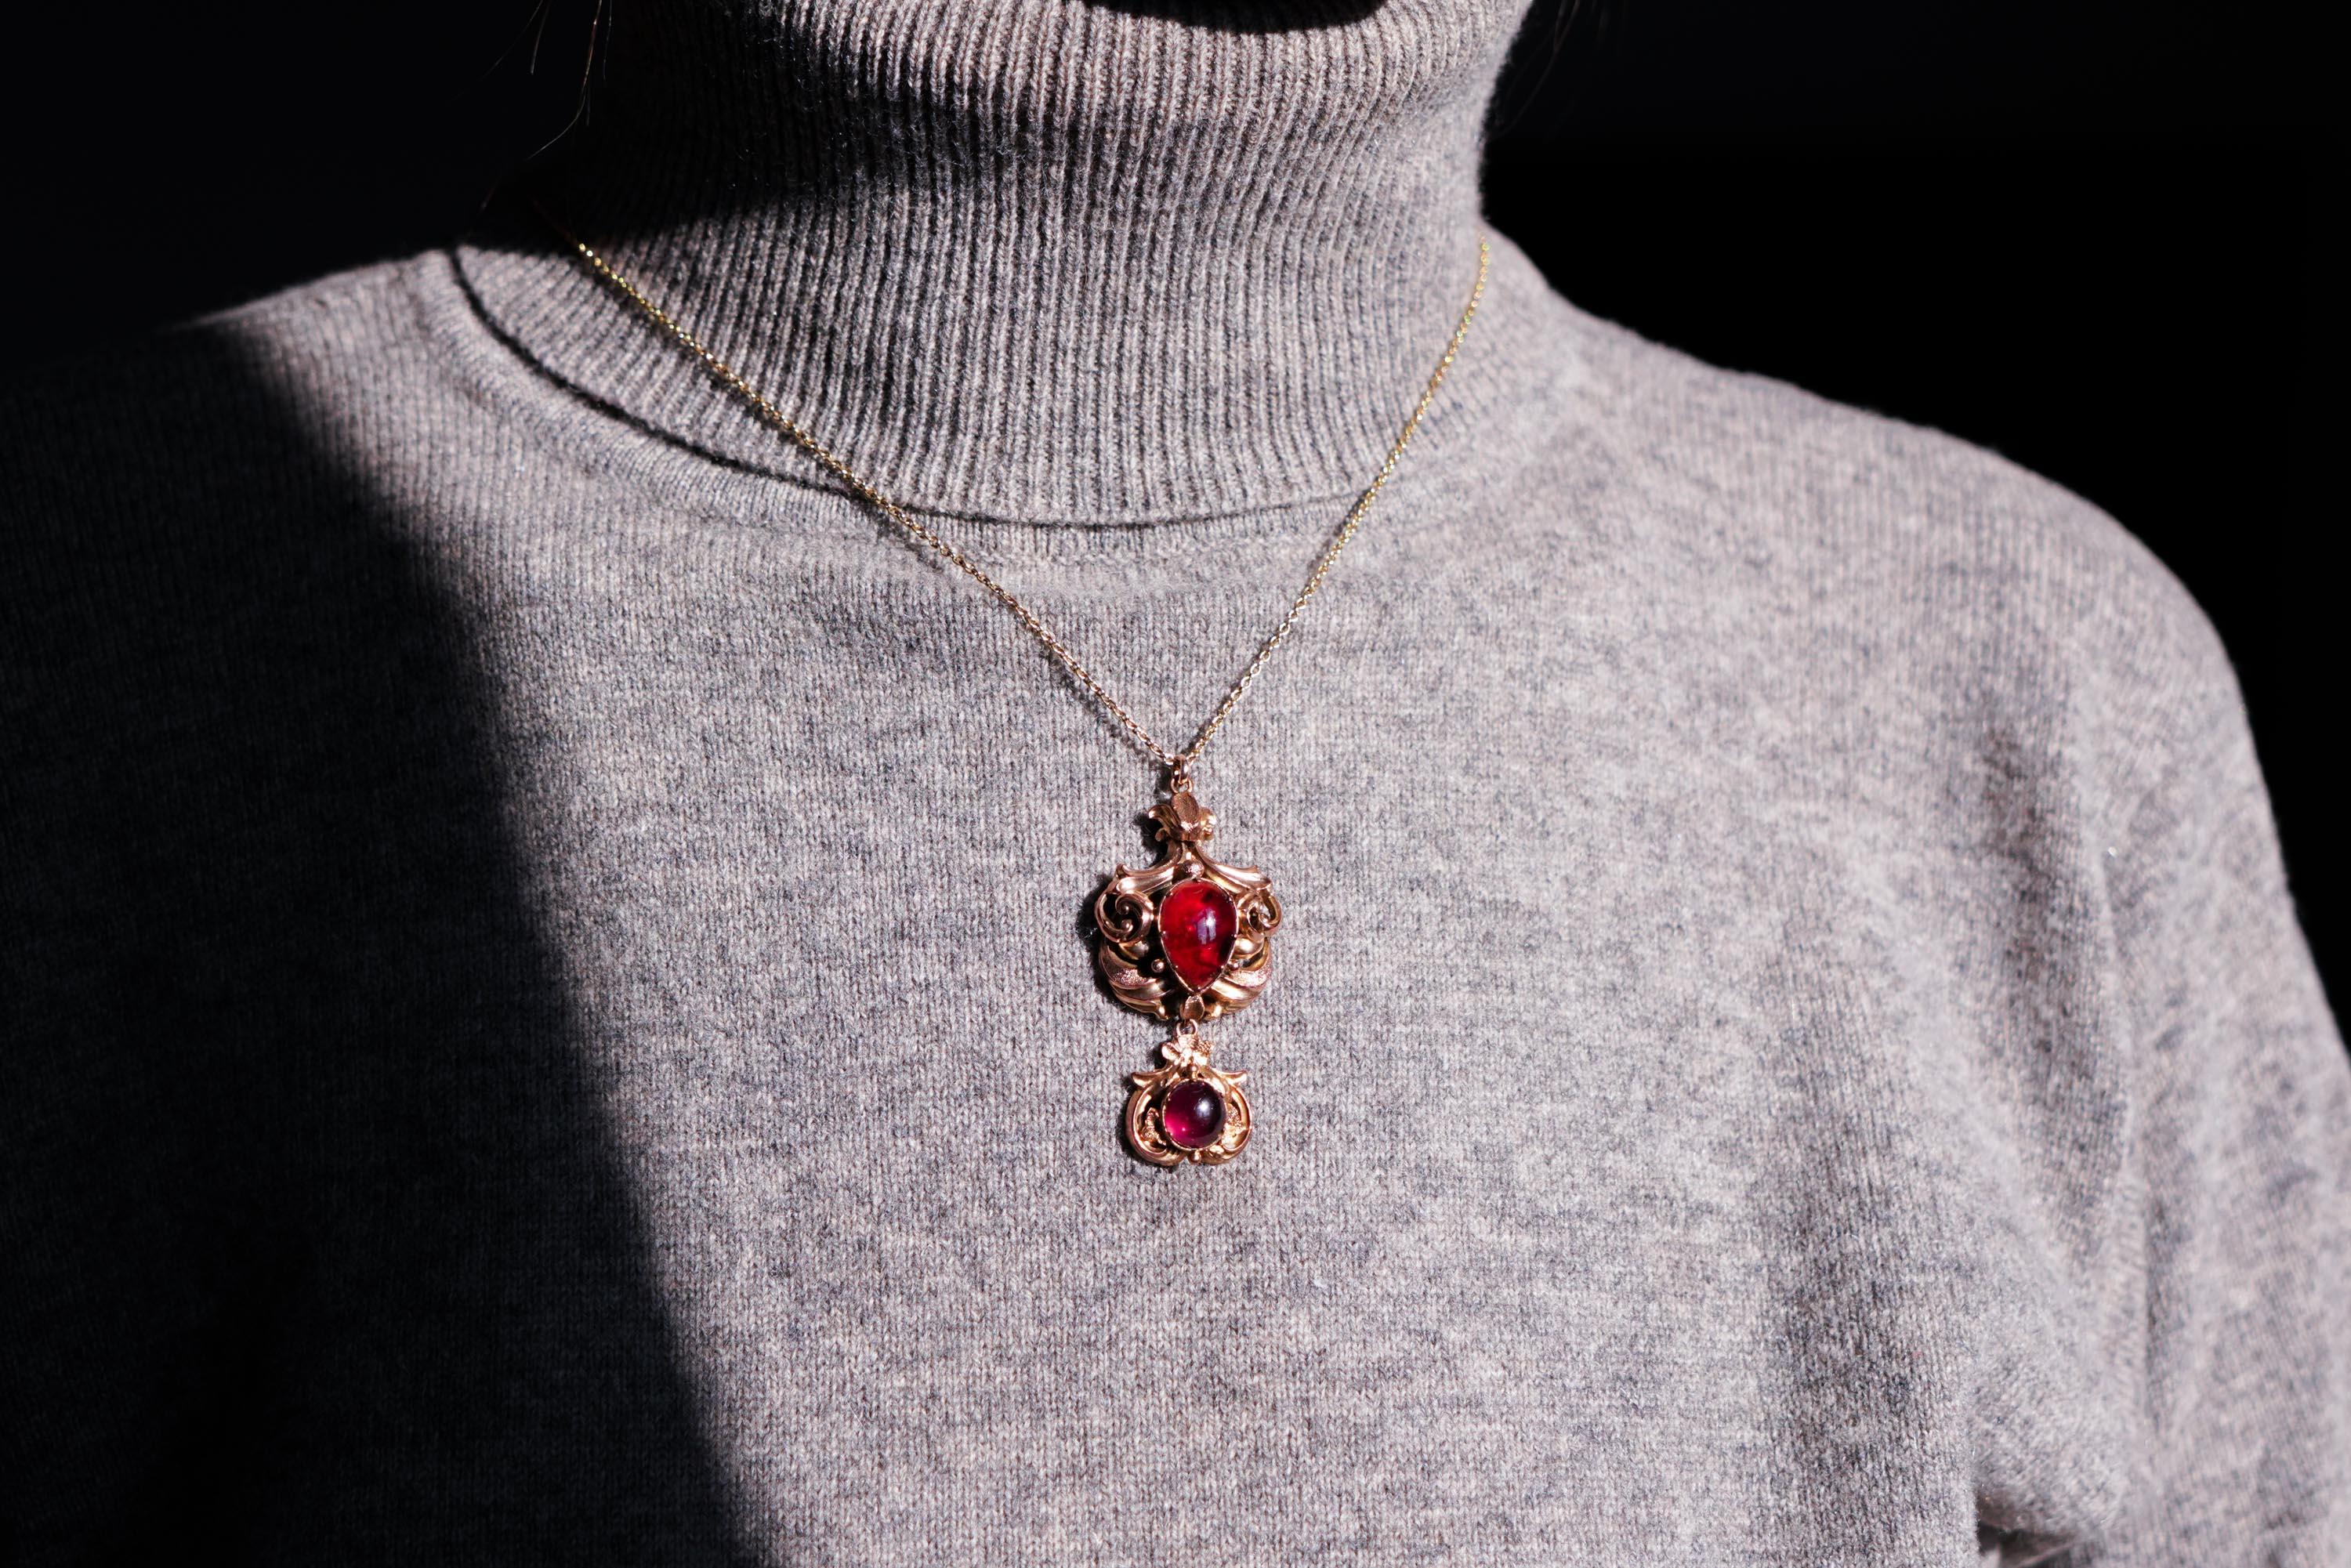 Early Victorian Antique Victorian 18k Gold Garnet Cabochon Necklace, C.1840 For Sale